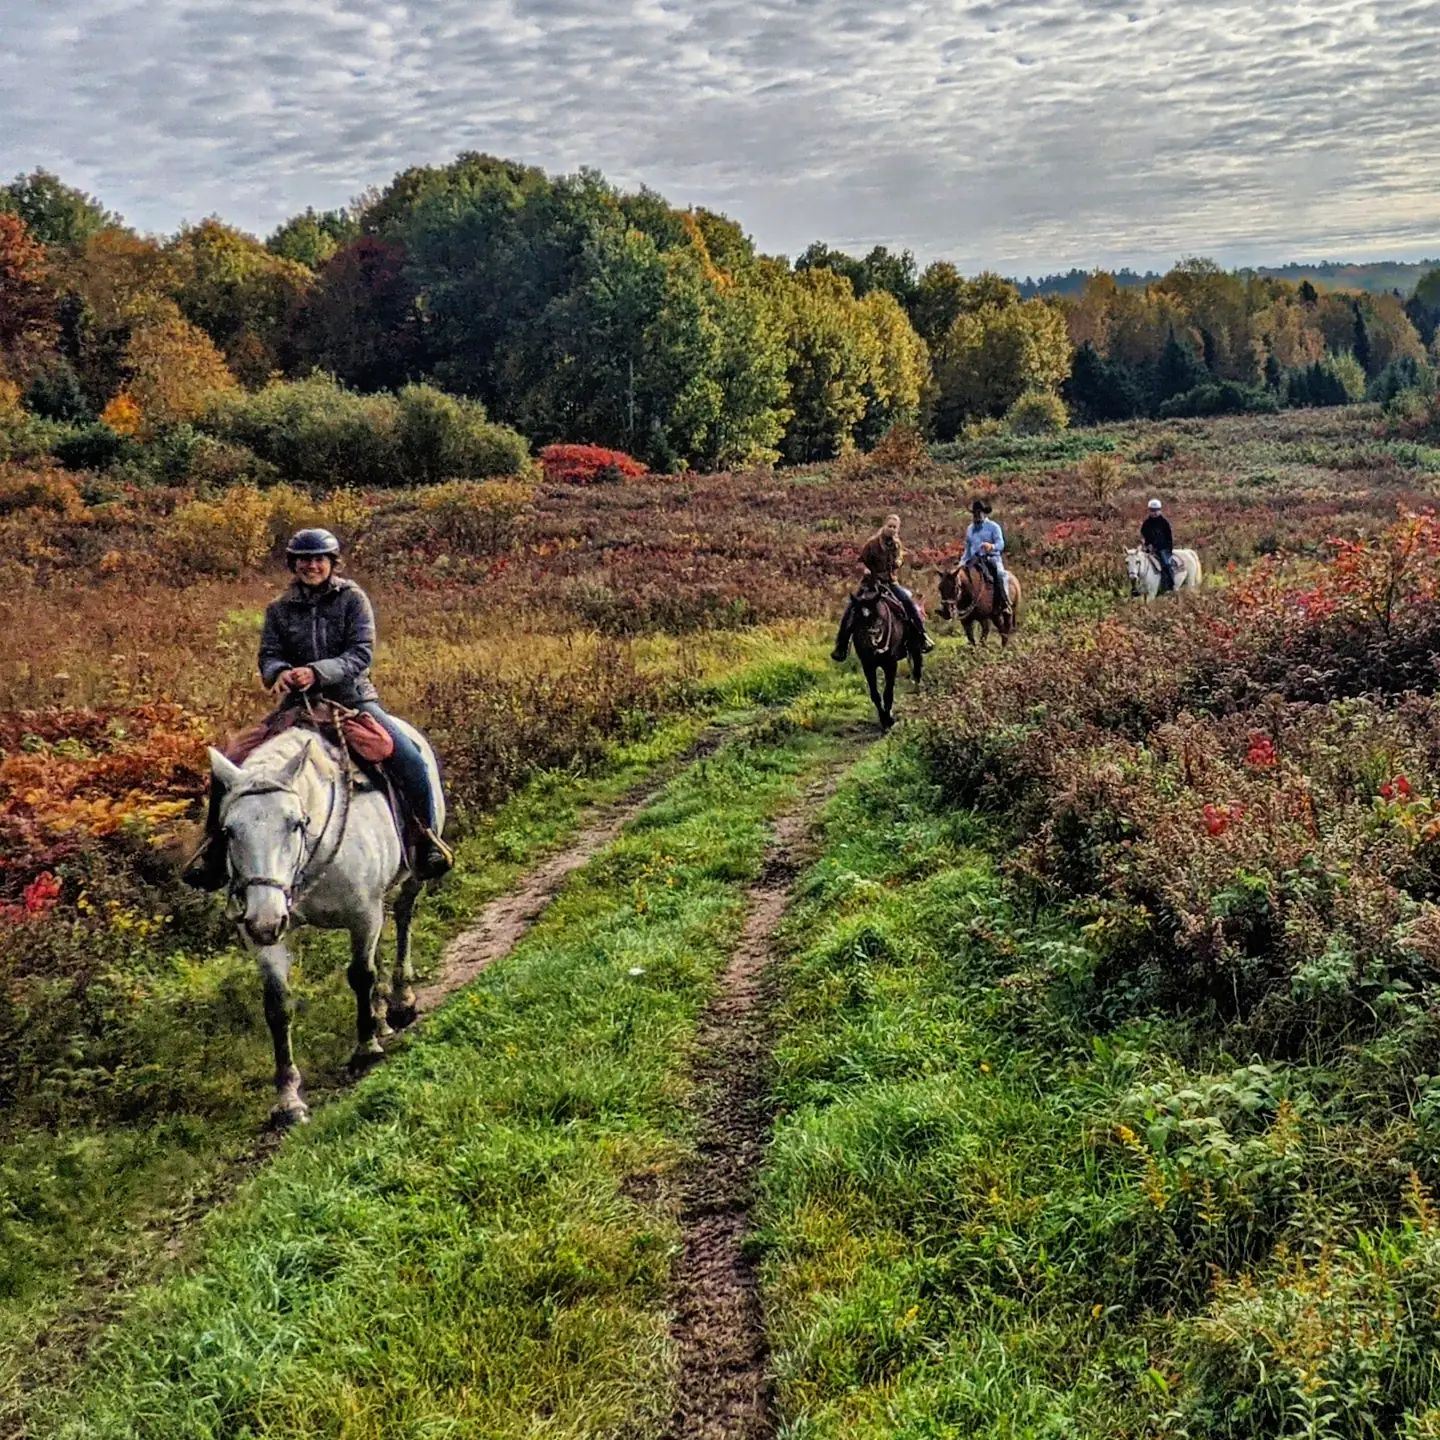 4 people on horseback ride through a green field with brightly coloured autumn trees in the background.